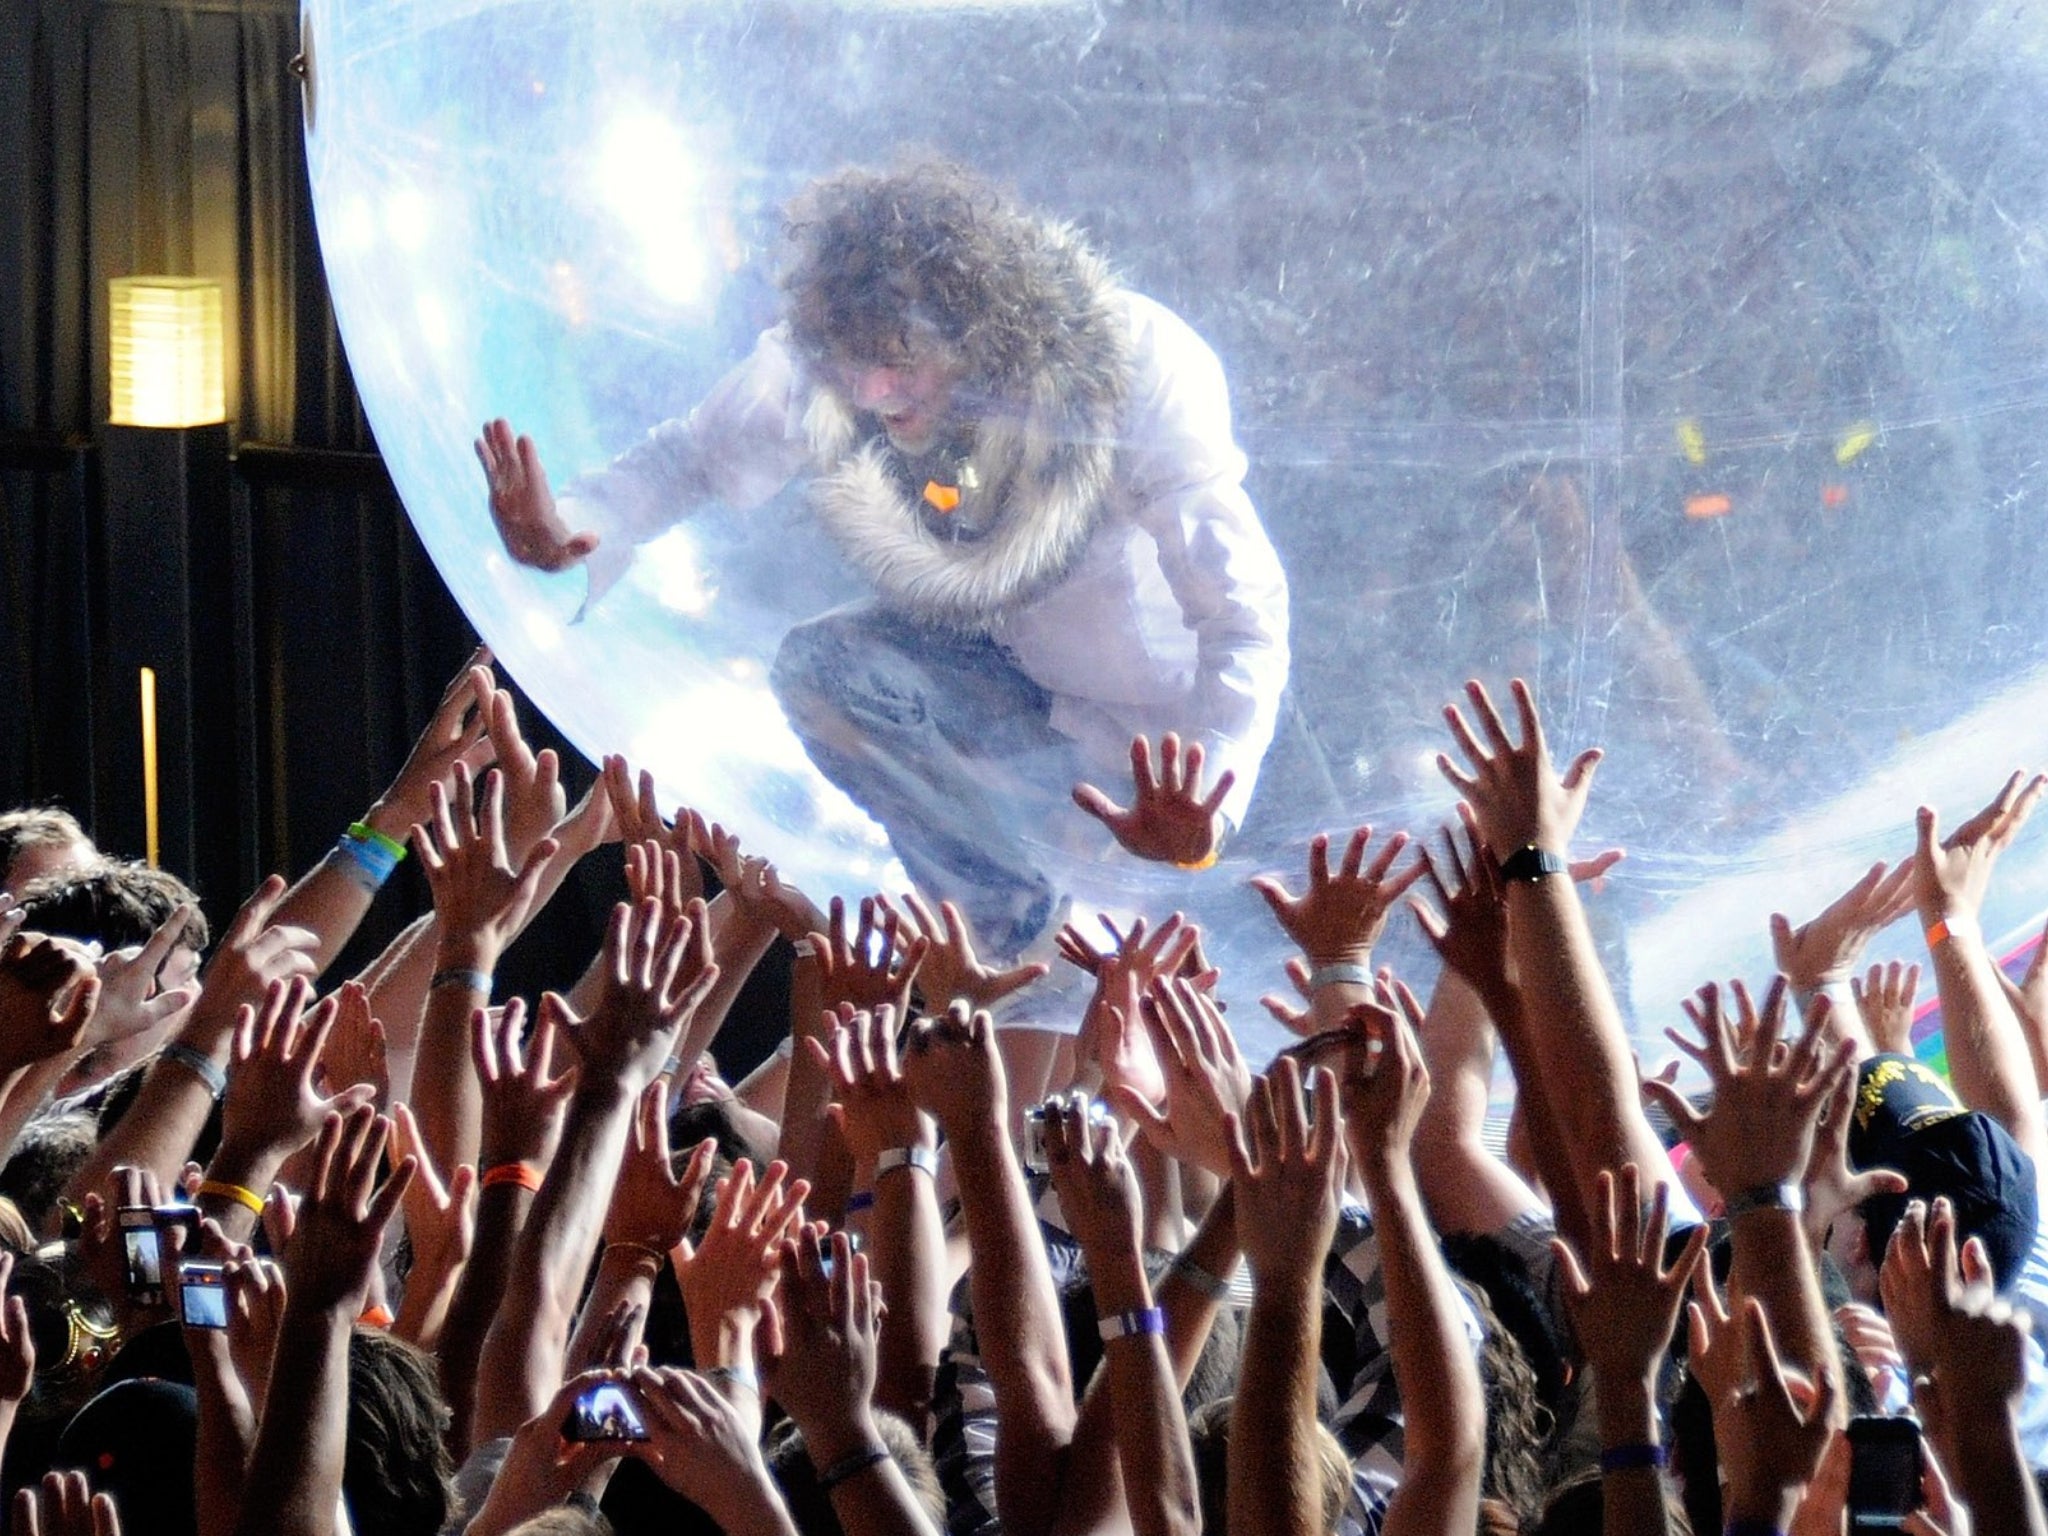 The Flaming Lips performing in a bubble in 2011